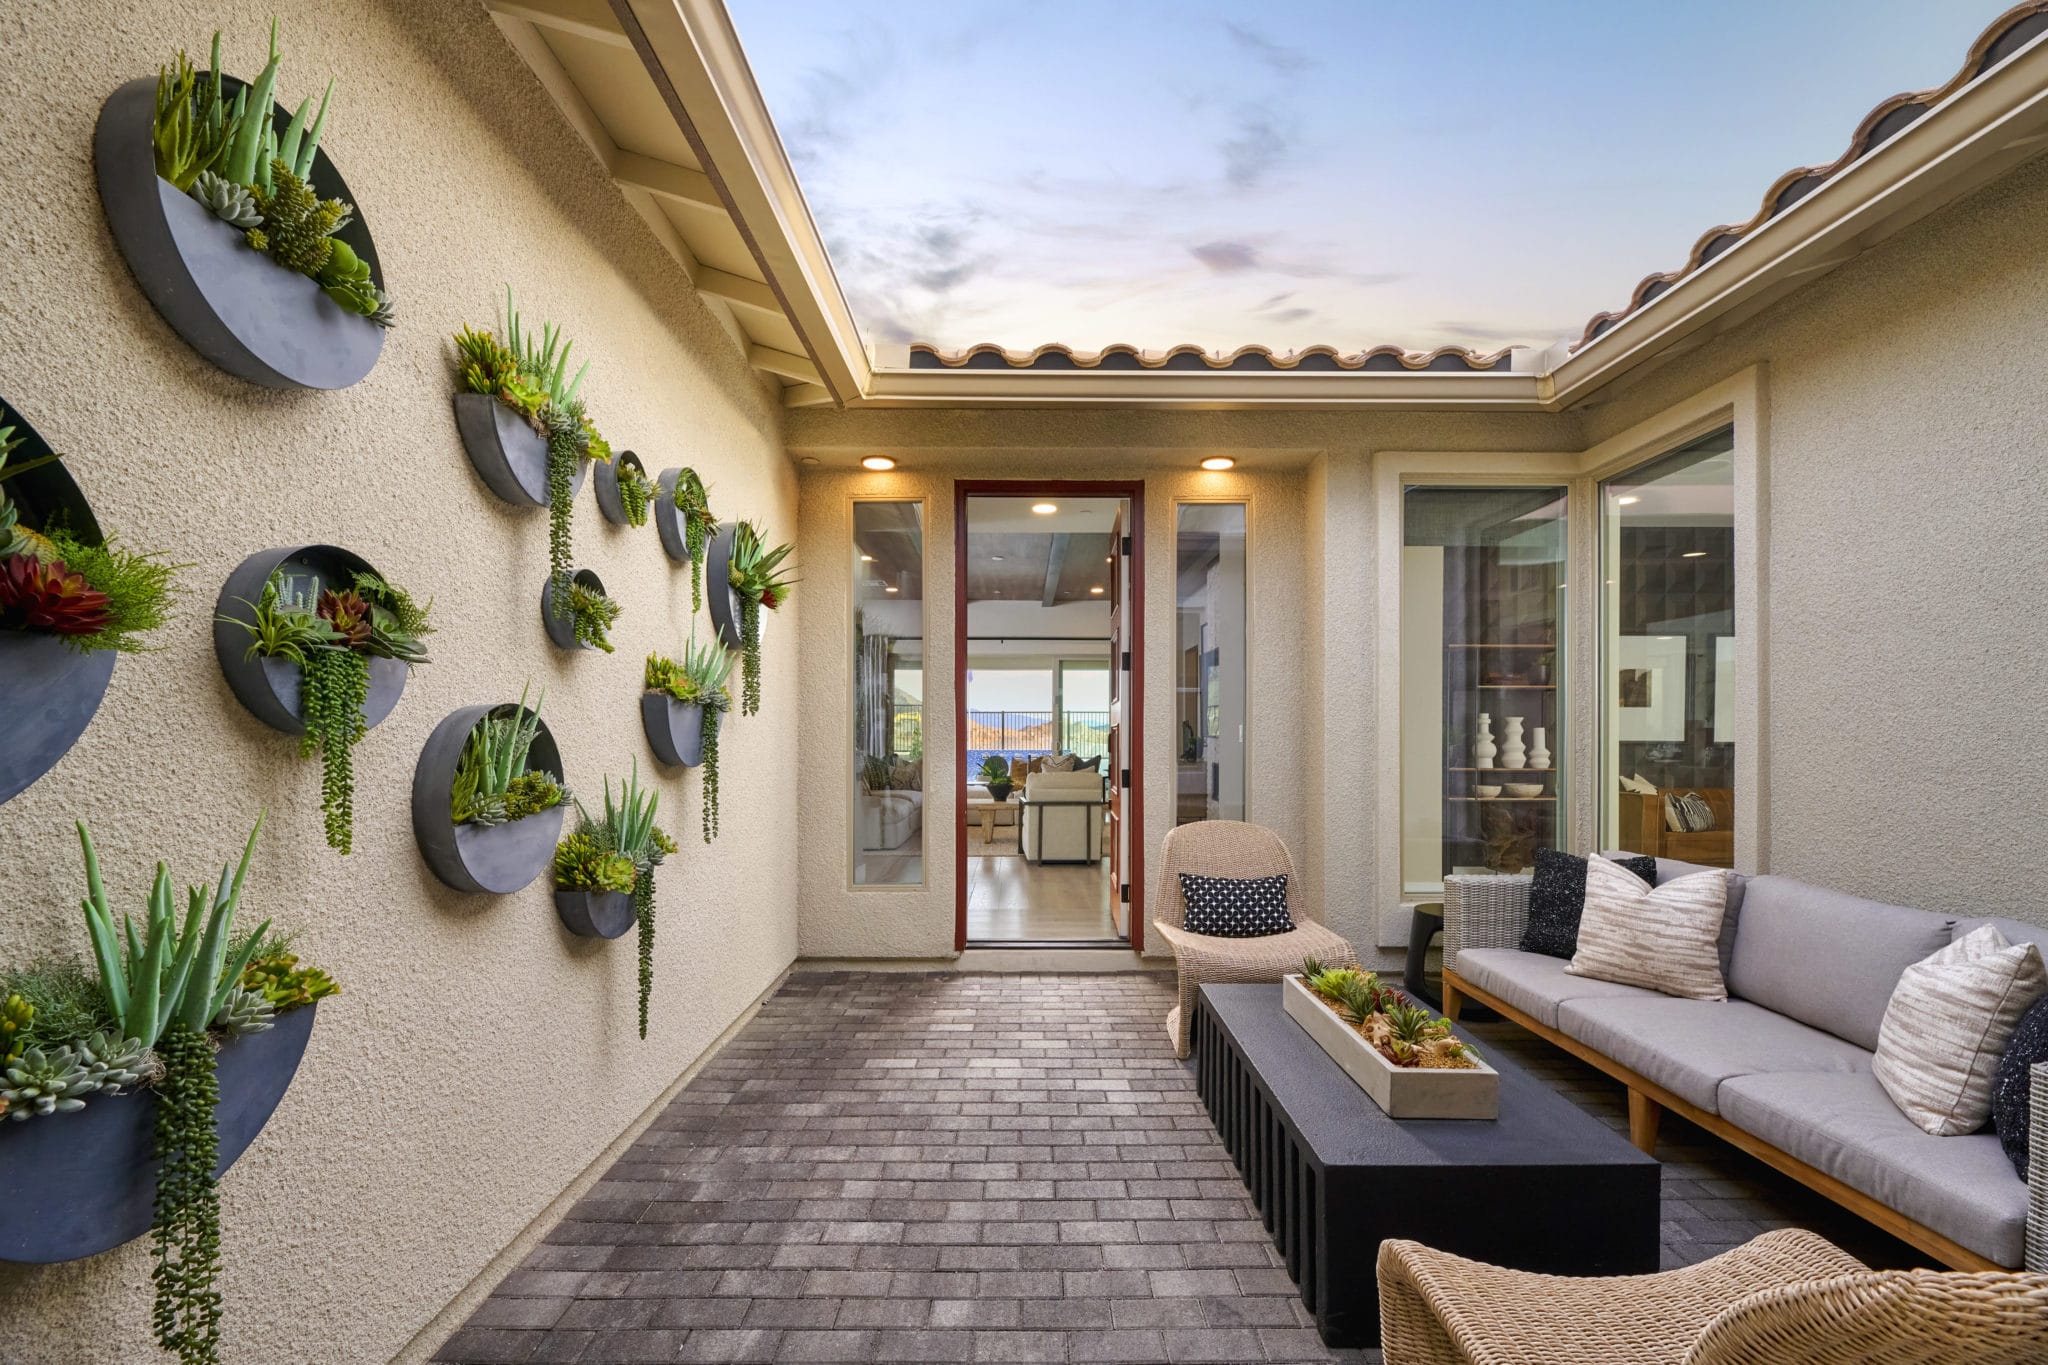 Courtyard of Plan 1 at Kings Canyon by Tri Pointe Homes